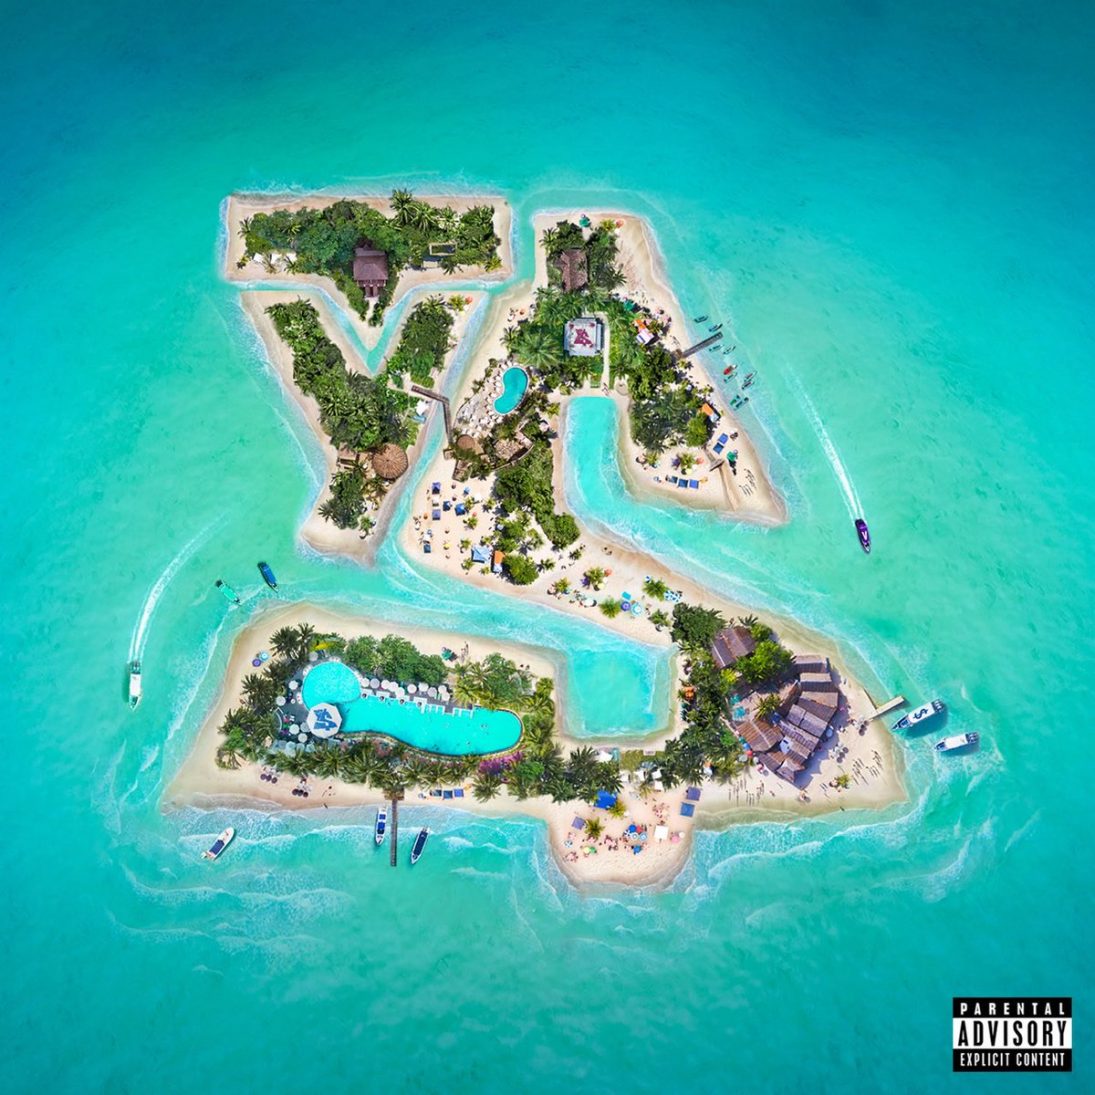 ty dolla ign beach house ep download zip